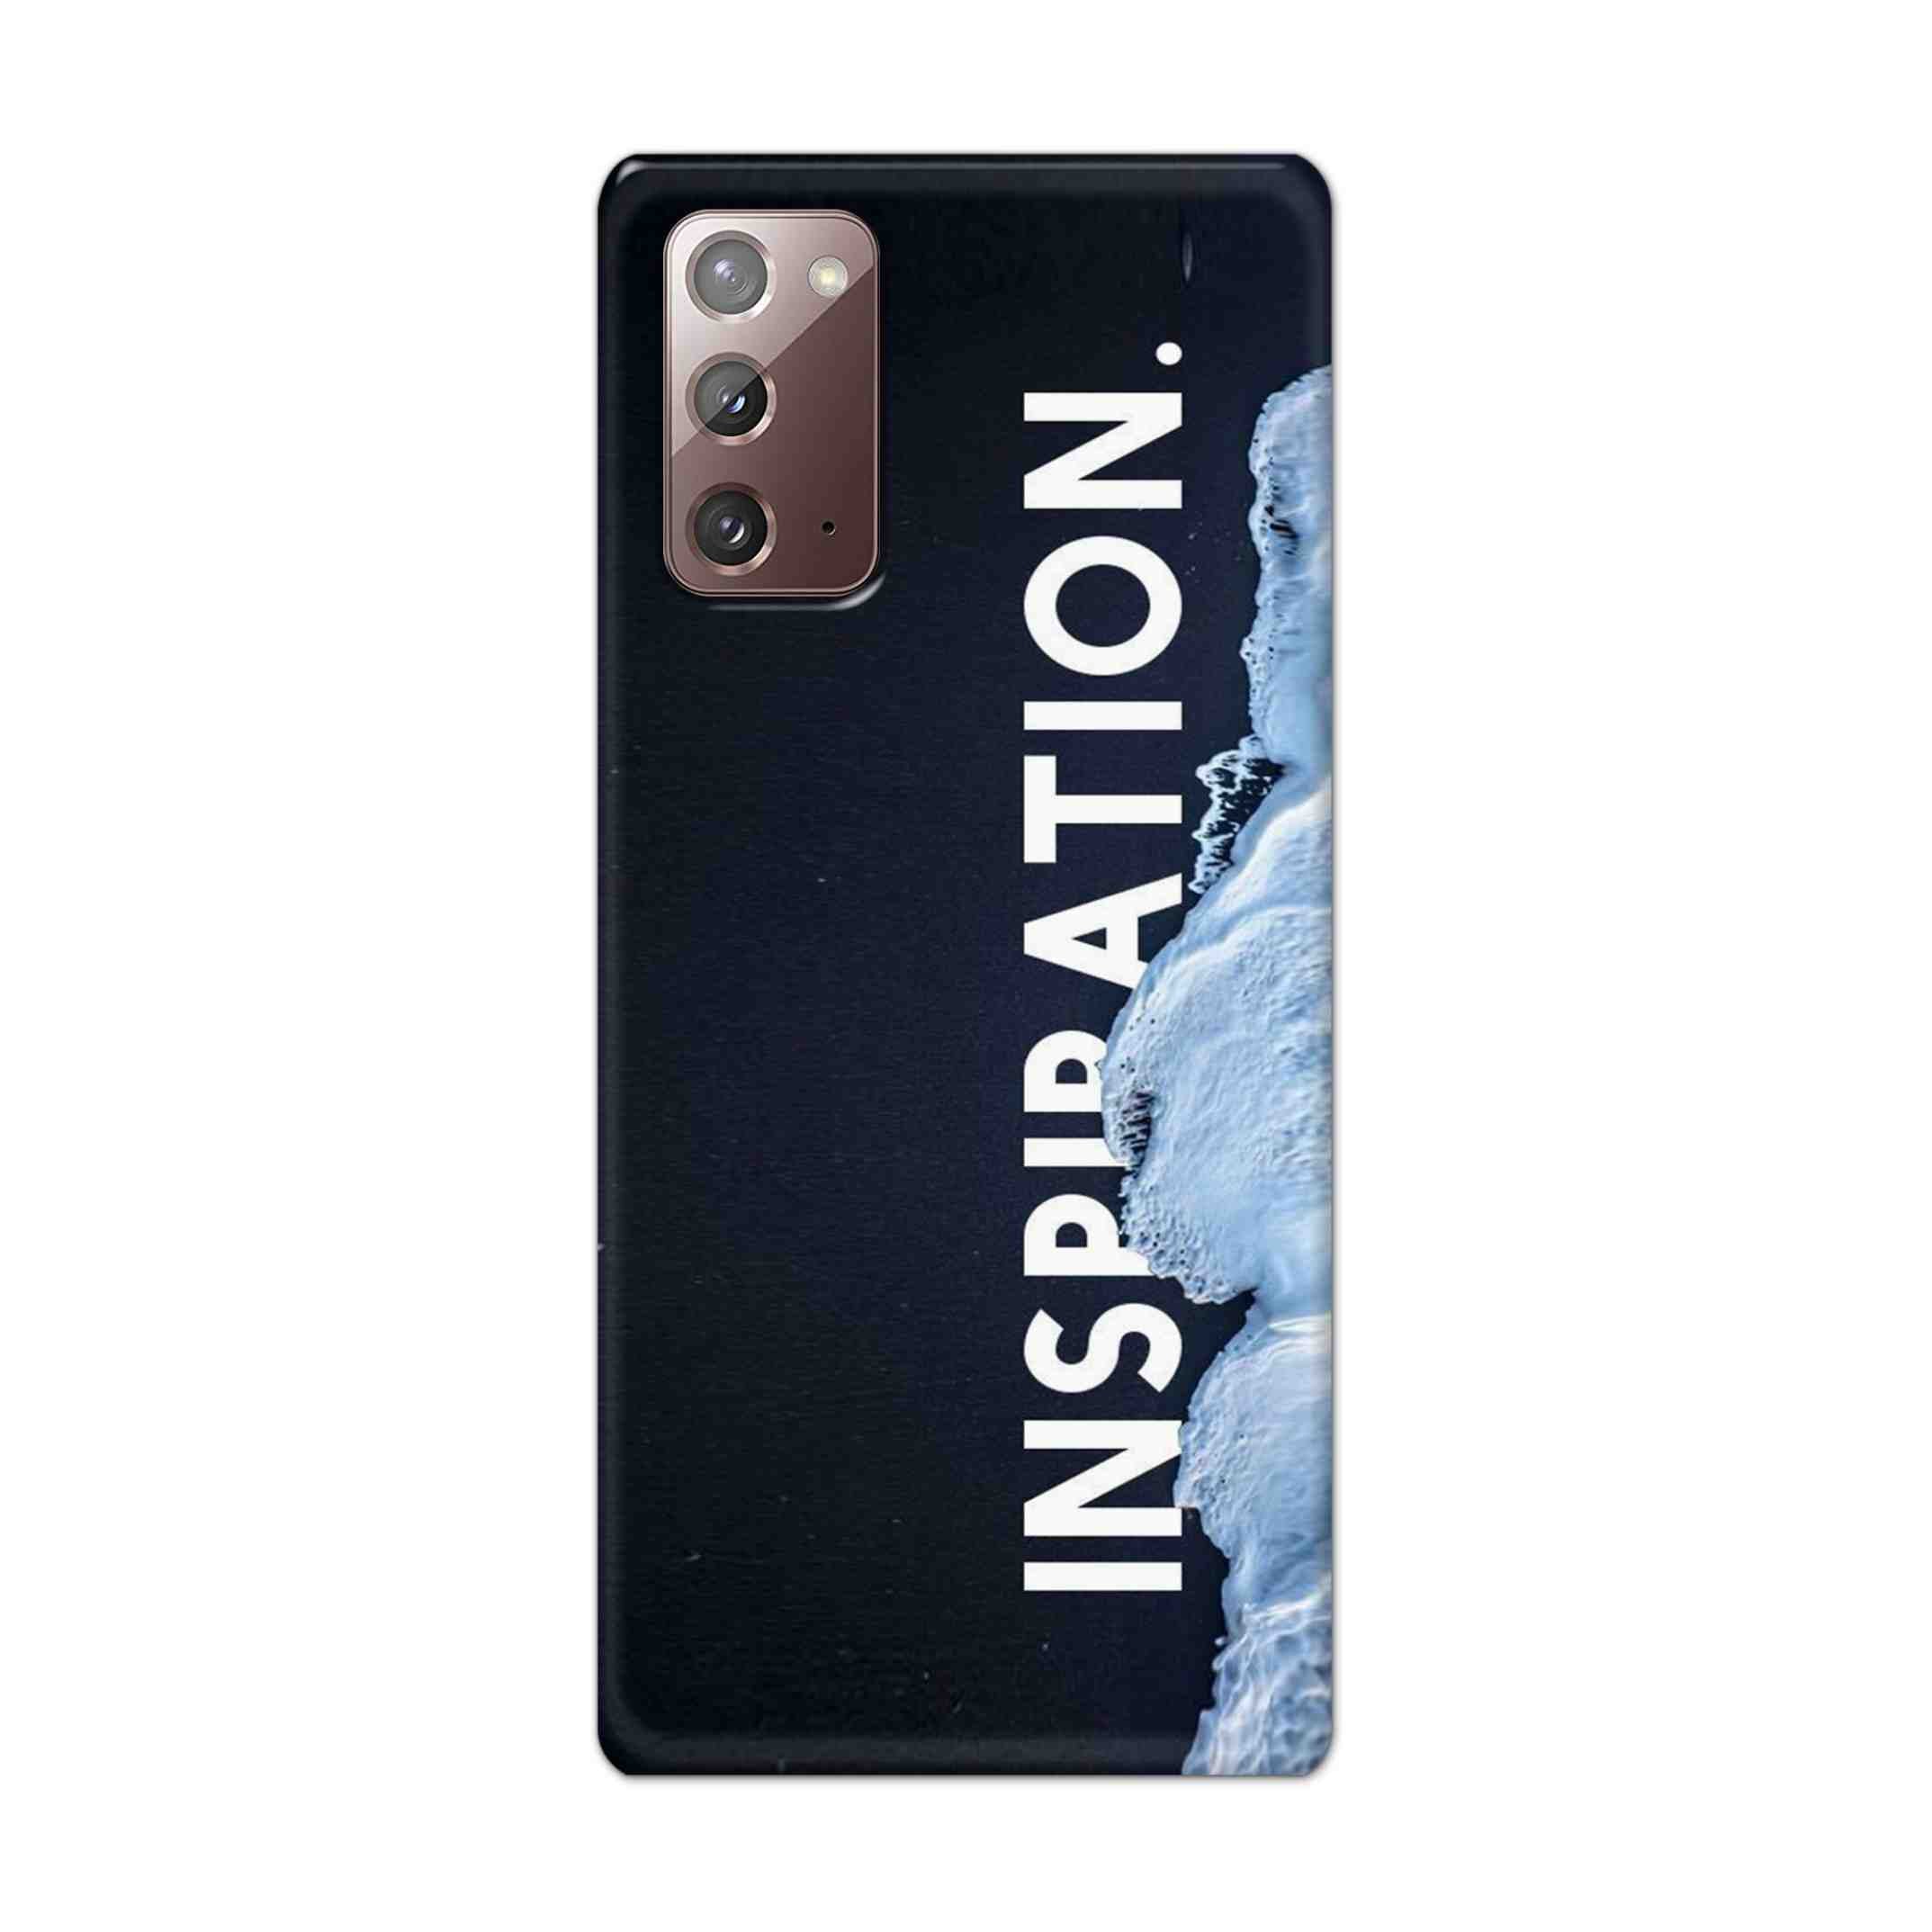 Buy Inspiration Hard Back Mobile Phone Case Cover For Samsung Galaxy Note 20 Online